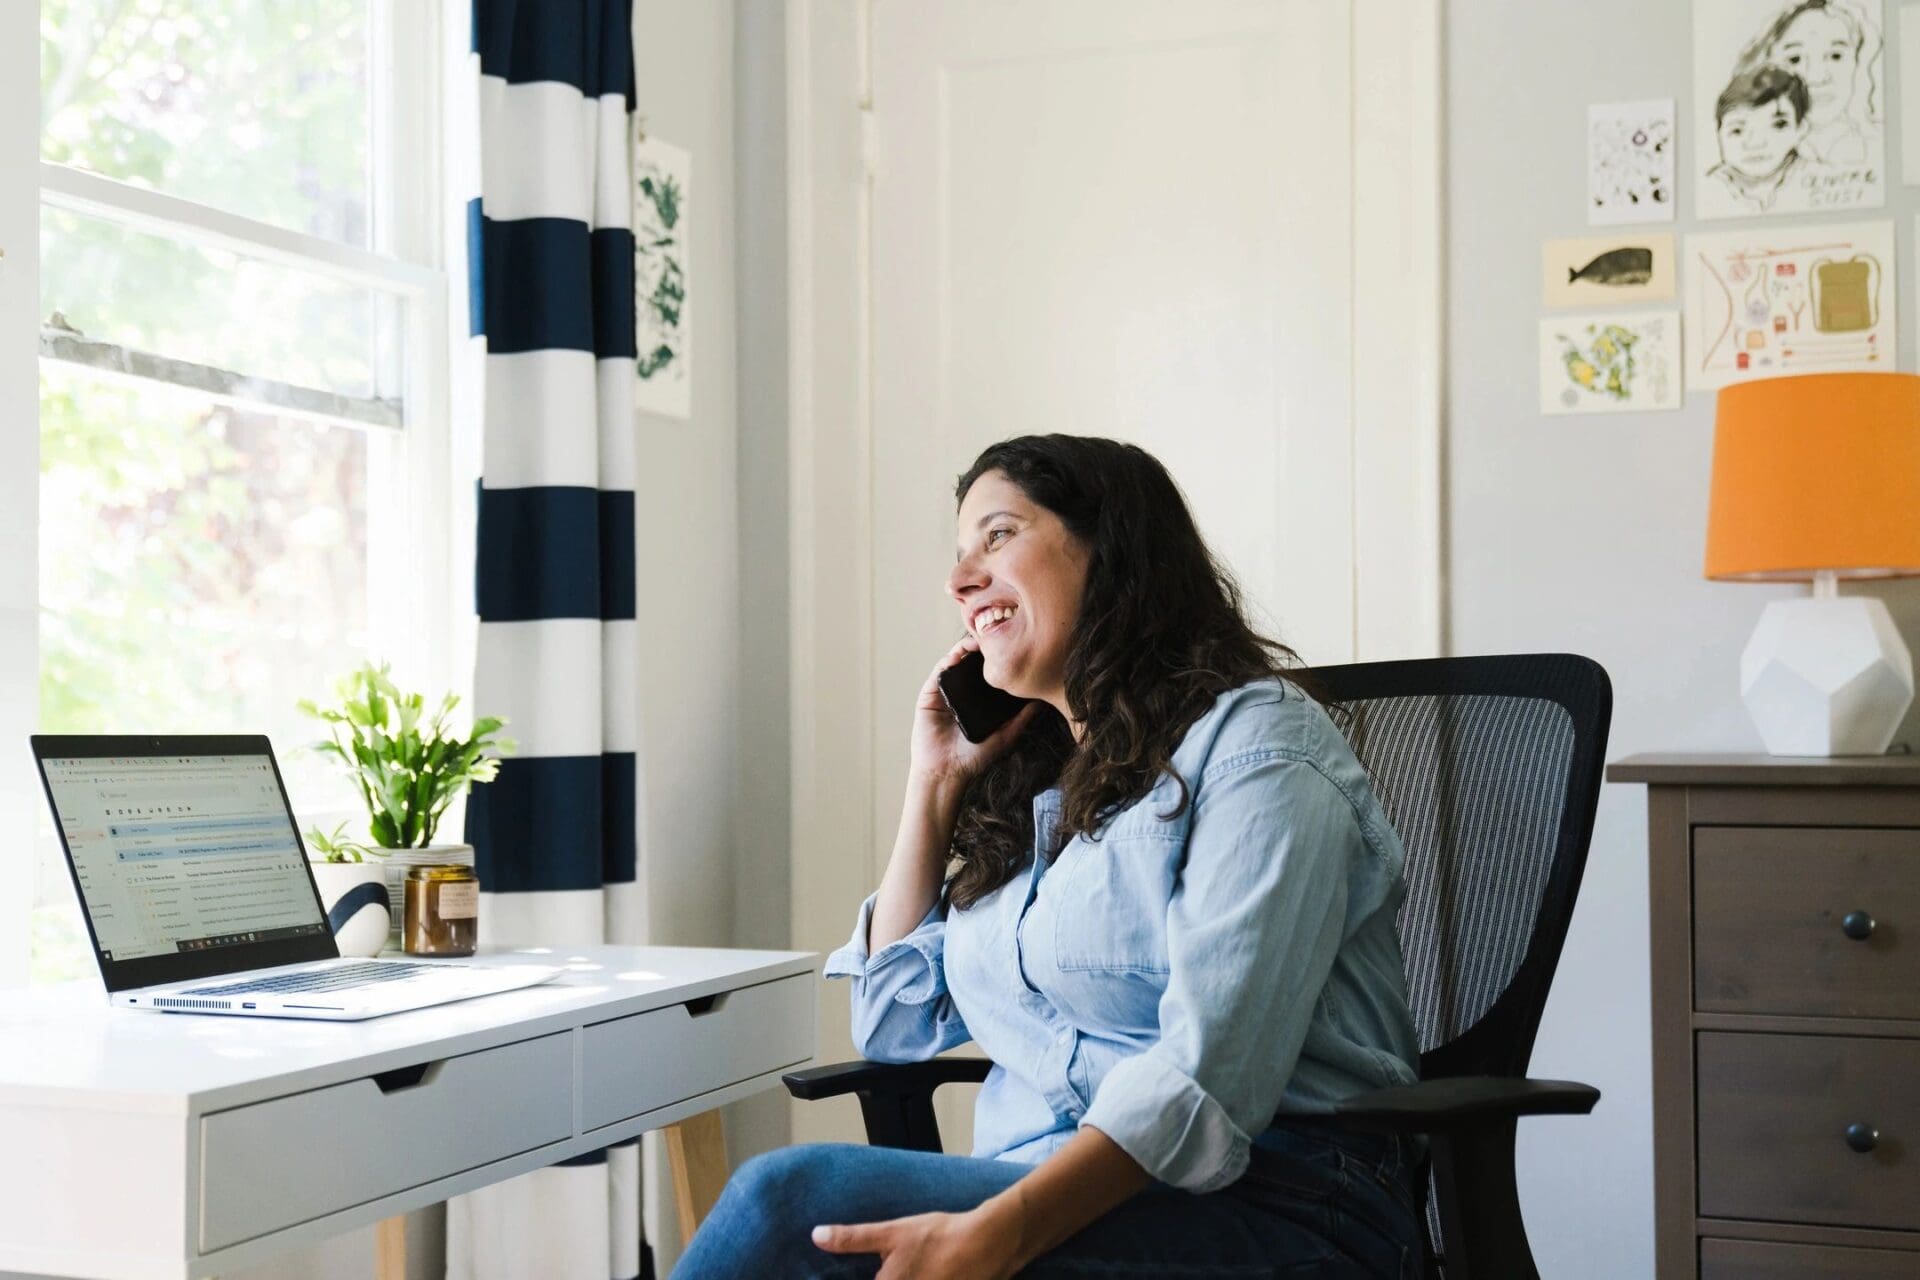 A woman talking on the phone while sitting in a chair in her home office.